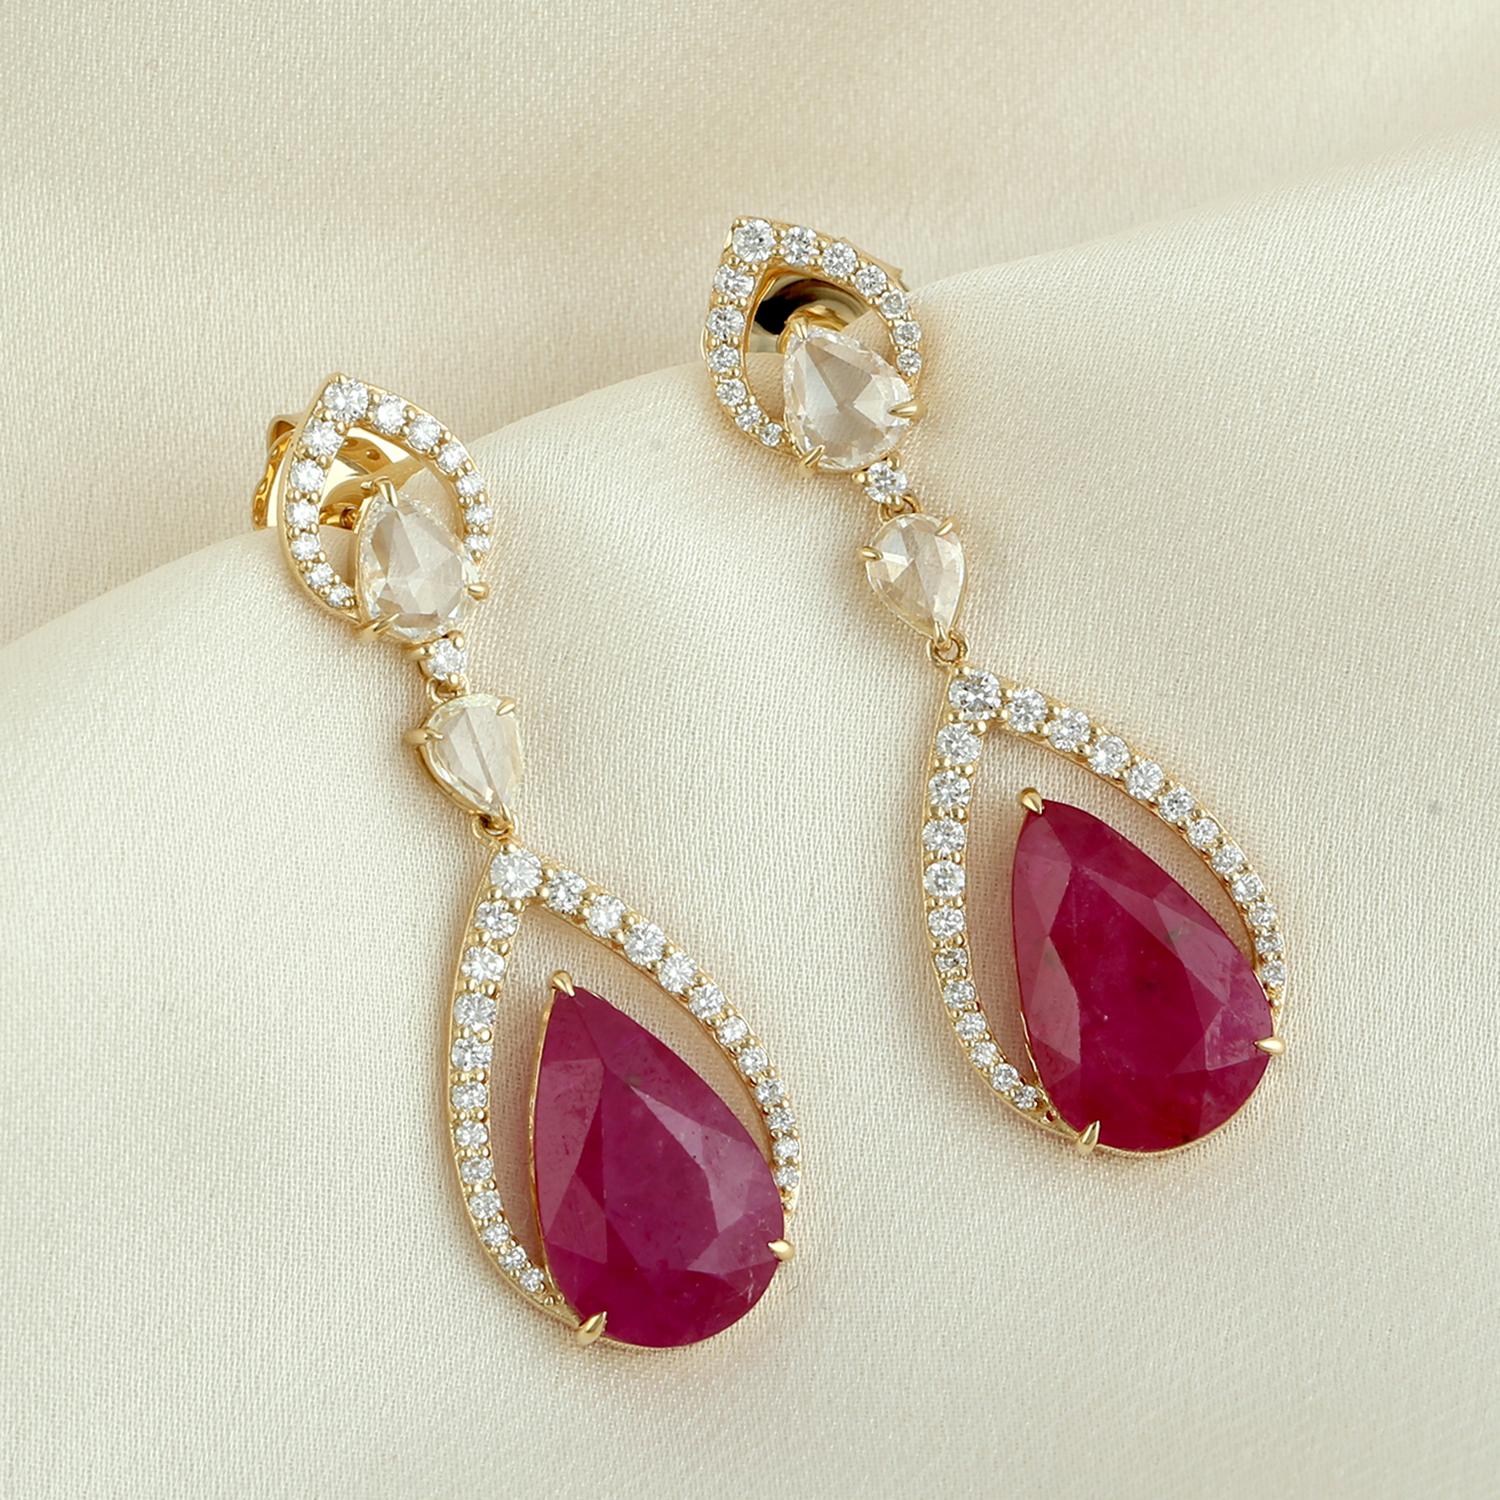 Art Deco Two Tier Mosambic Ruby Dangle Earrings With Diamonds Made In 18k White Gold For Sale